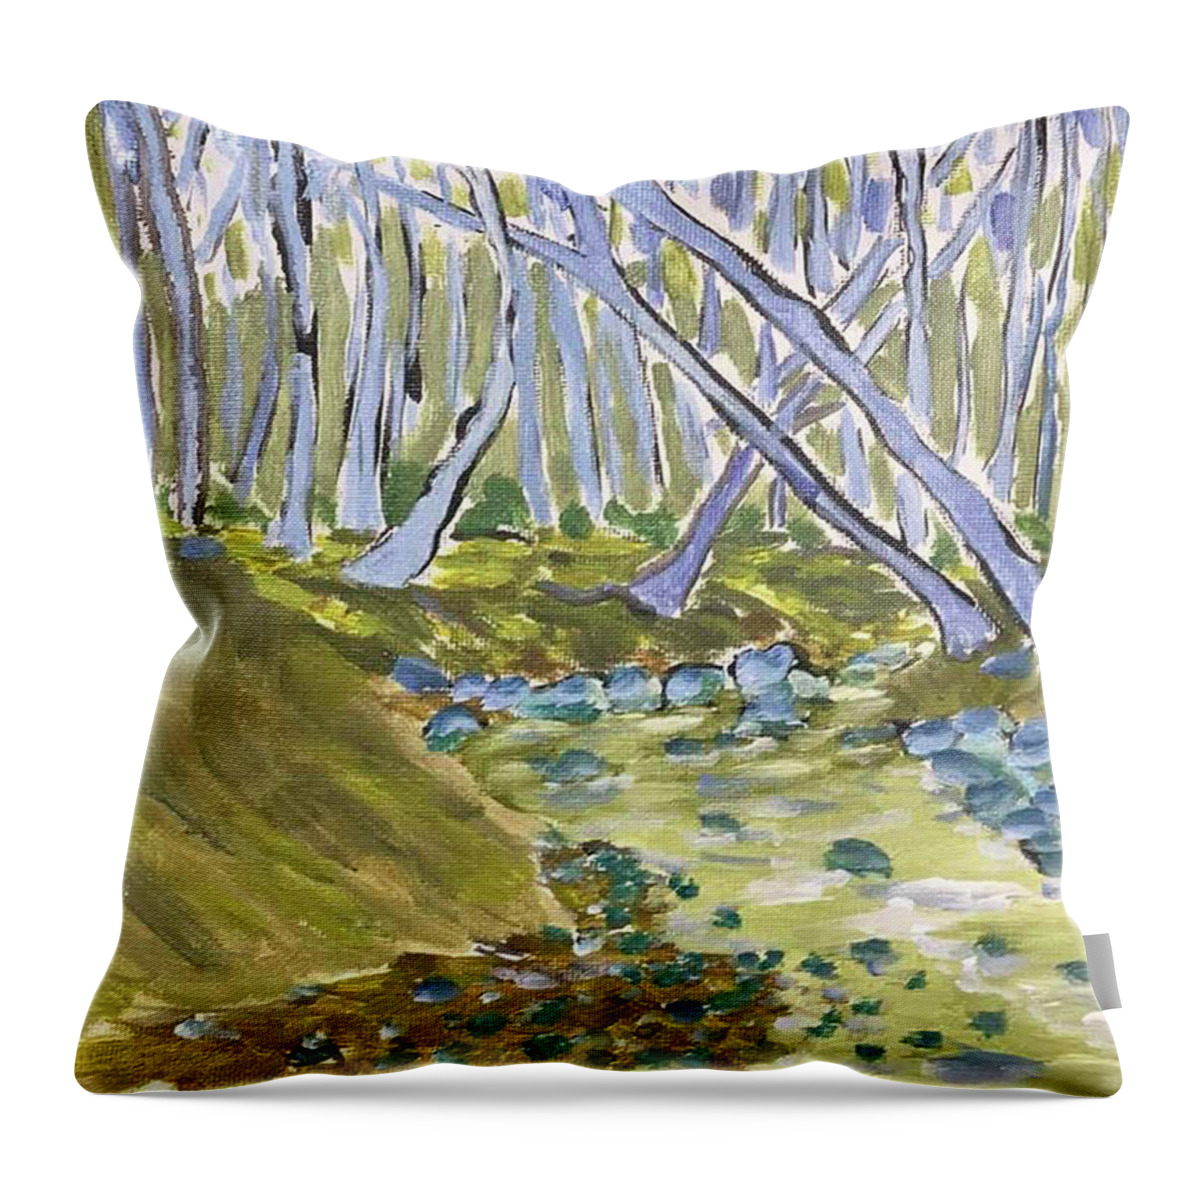  Throw Pillow featuring the painting Norbeck Meadows Creek by John Macarthur